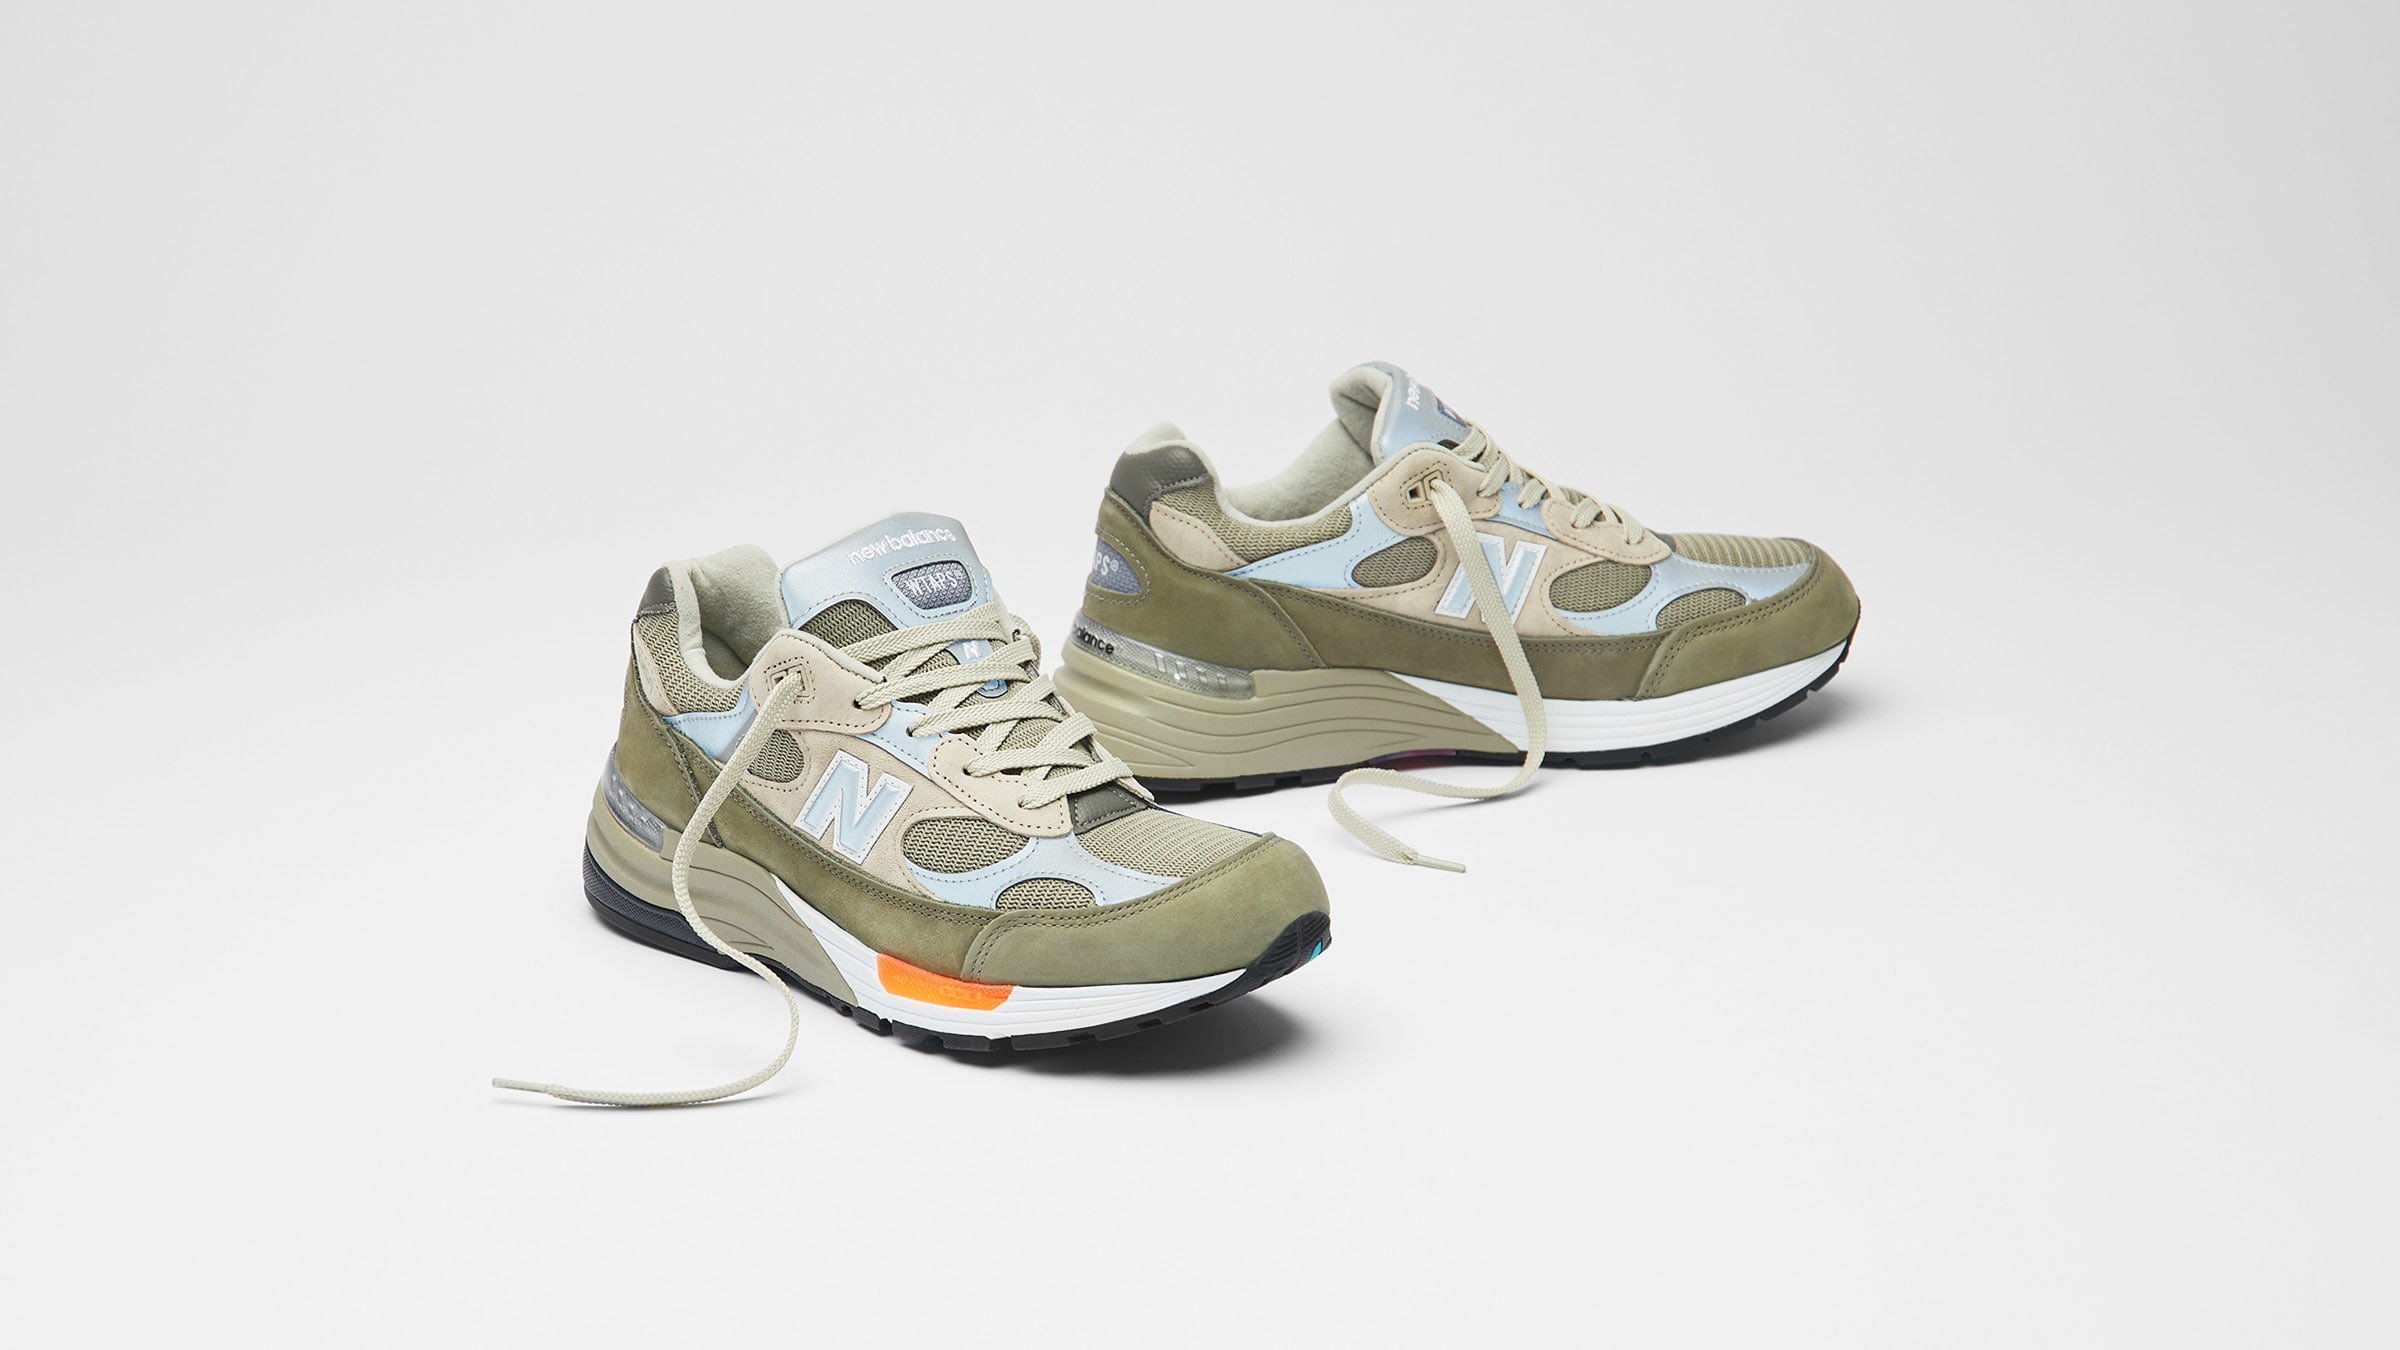 New Balance x WTAPS M992WT - Made in USA (Olive Drab) | END. Launches